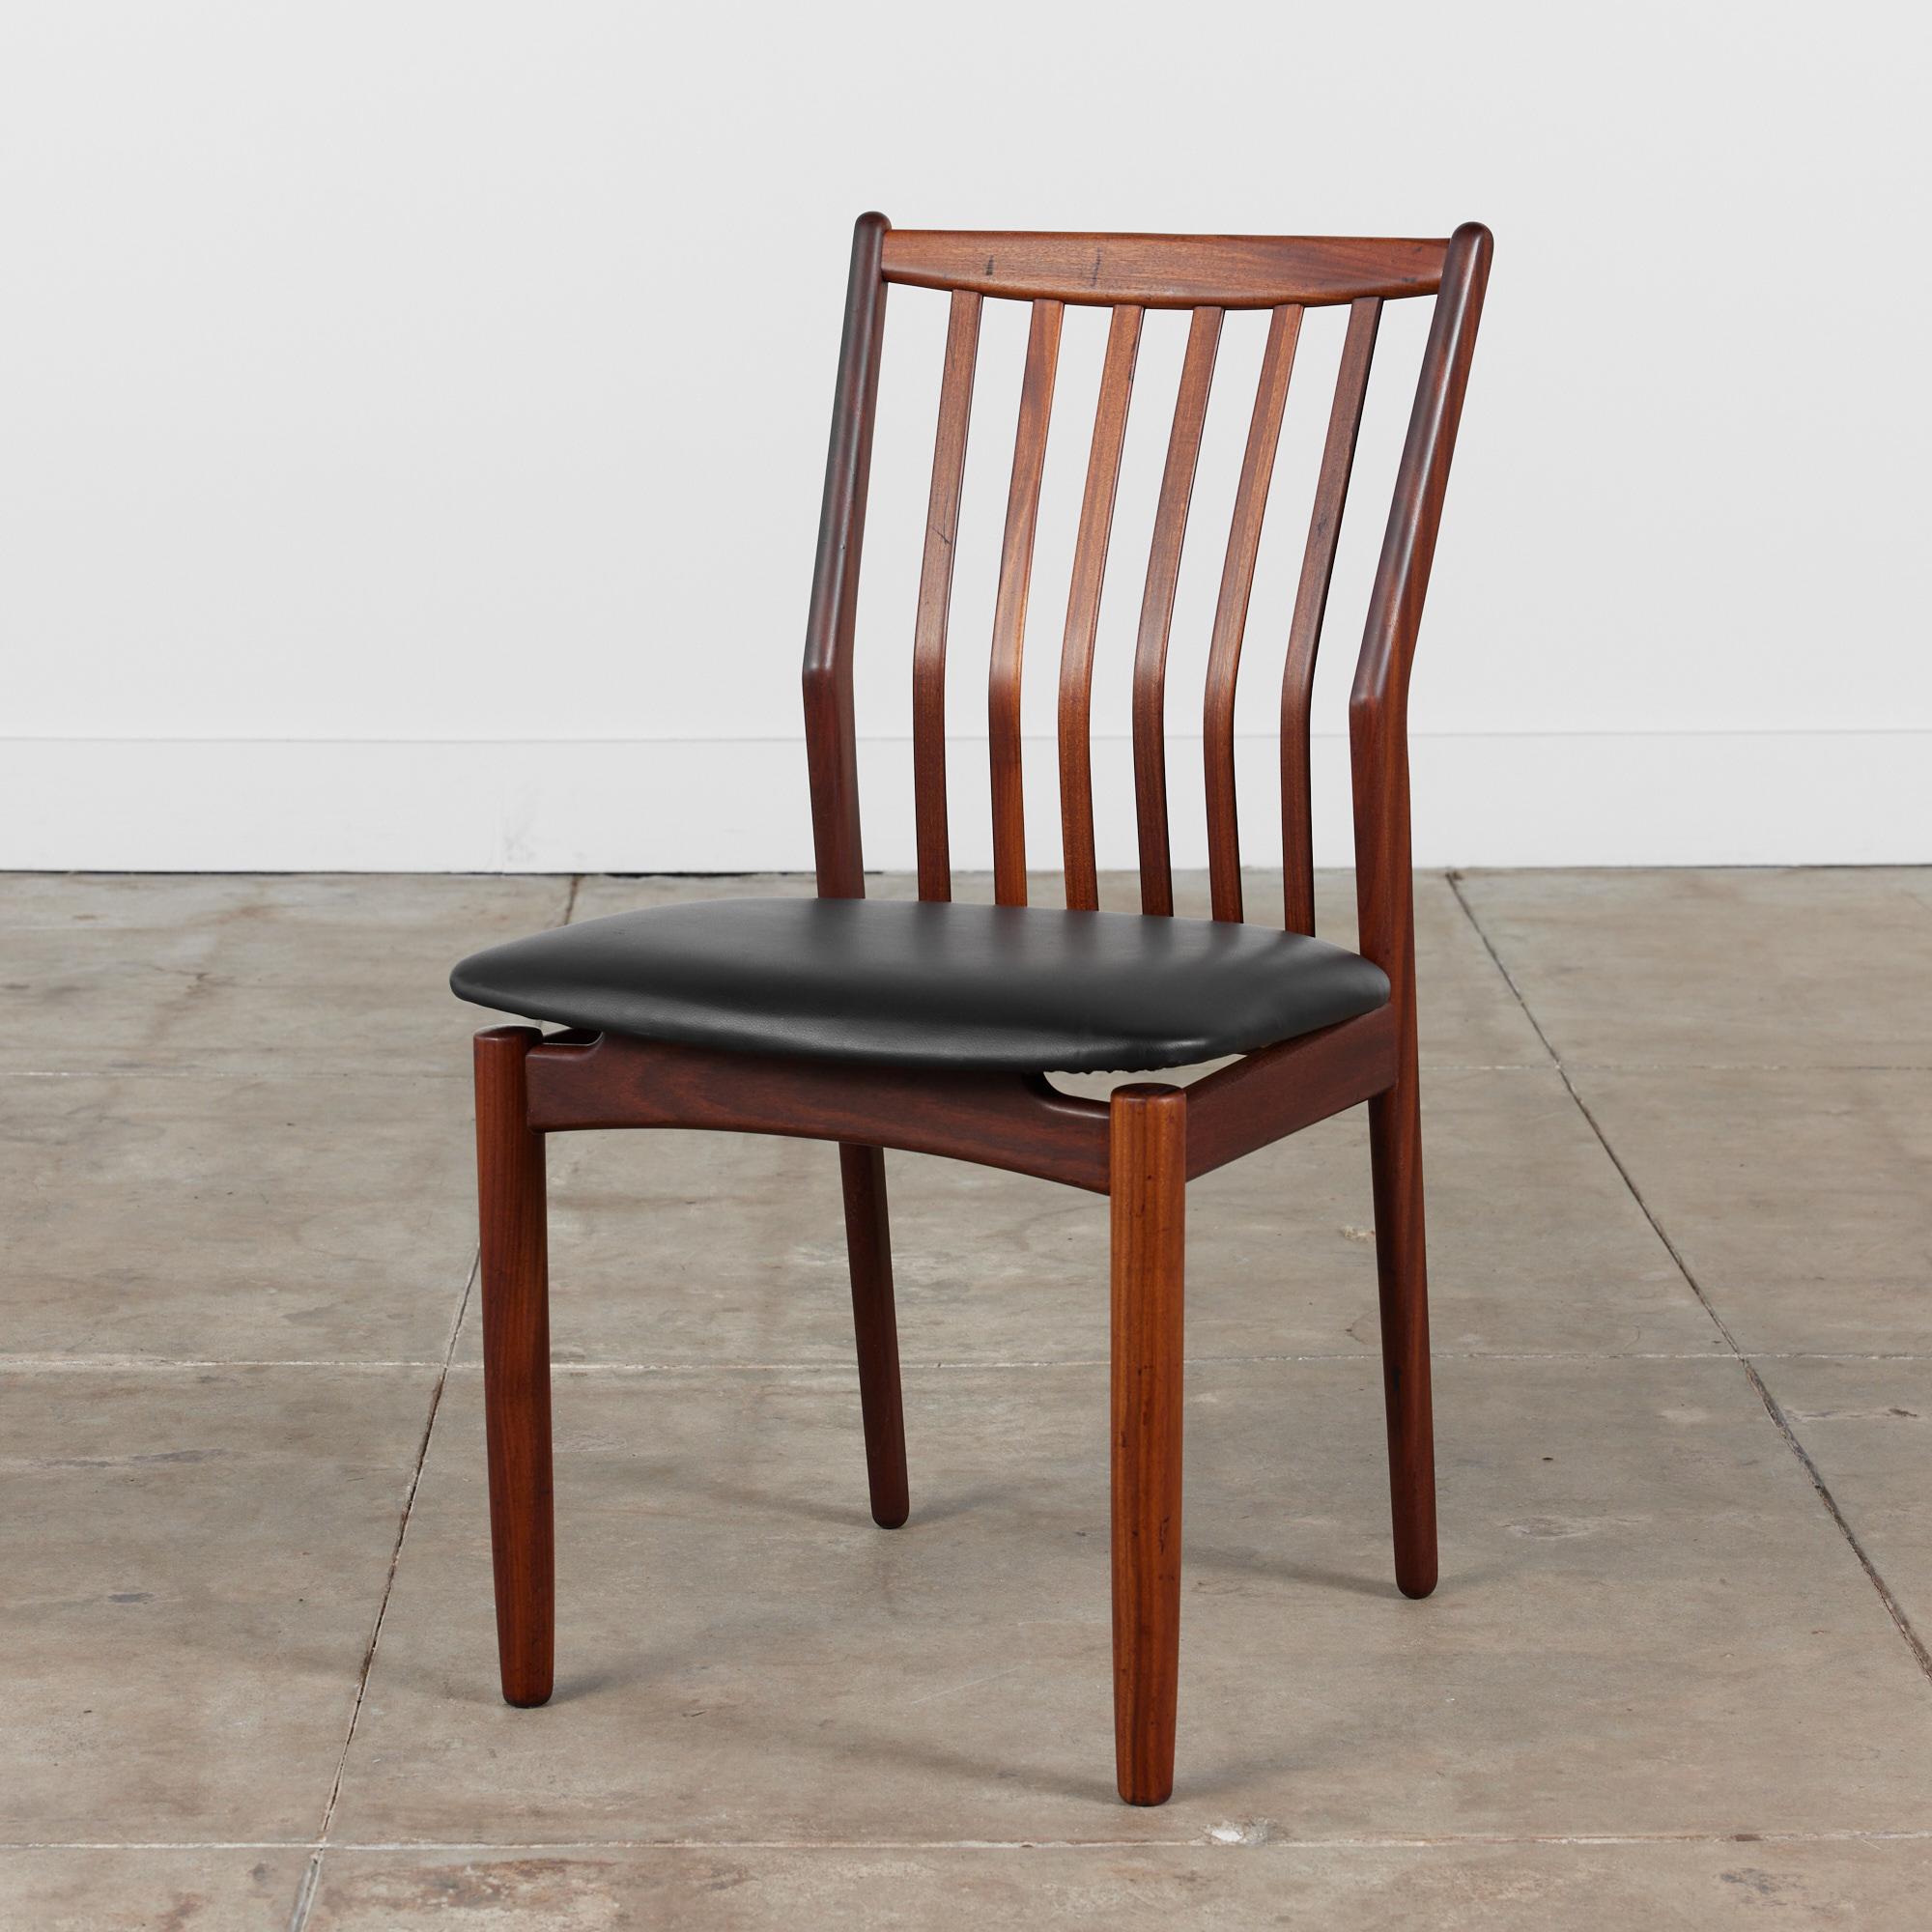 Svend A. Madsen Afrormosia teak chair for Moreddi, circa 1960s, Denmark. The chair features a slatted curved backrest and wide black Naugahyde seat.

Dimensions
17.5